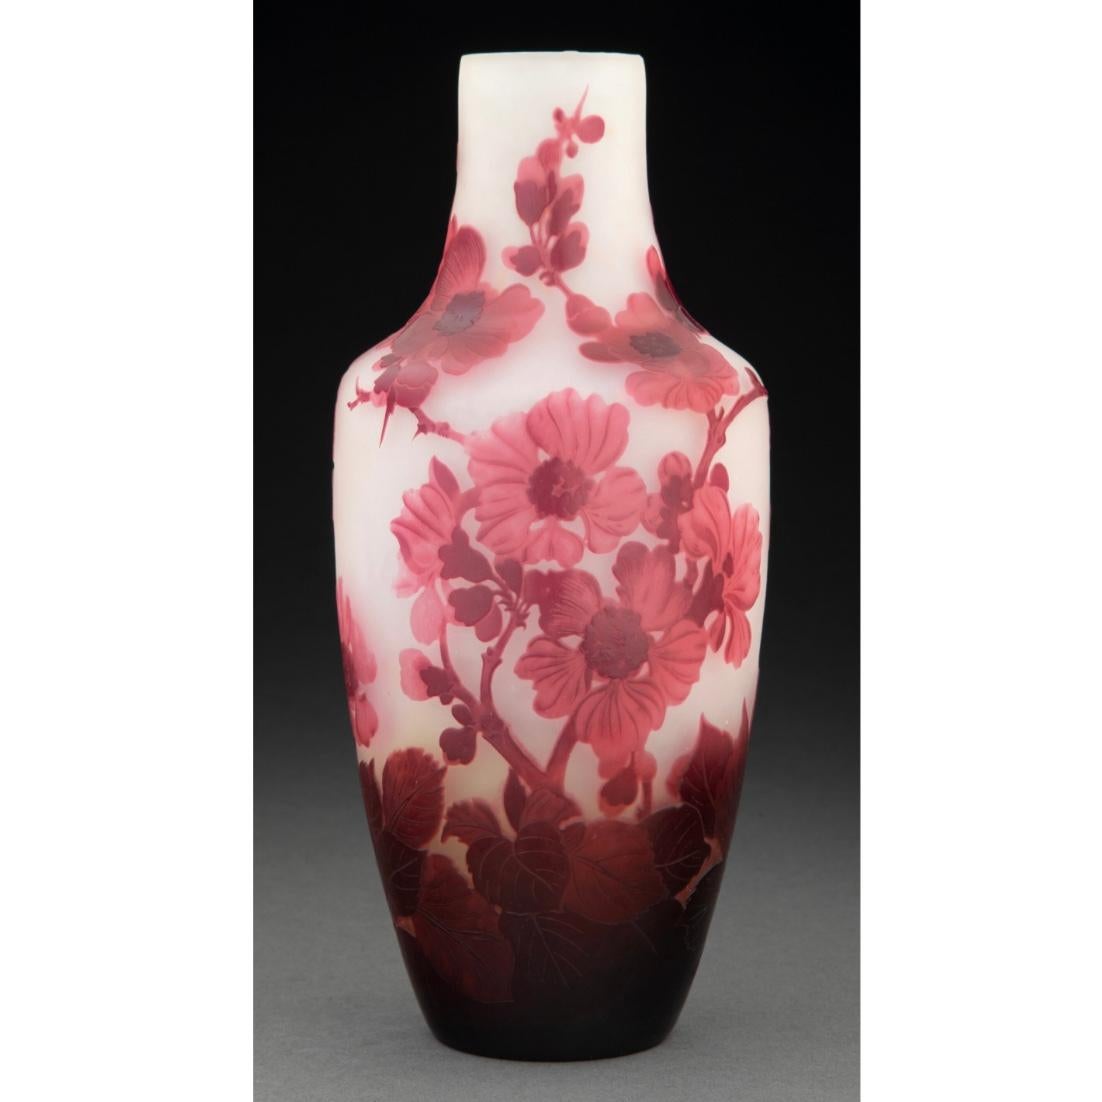 Galle Cameo Glass Anemone Vase, circa 1900 Art Nouveau 
Marks: Gallé
Height: 9.5 inches (24.1 cm)
Diameter: 4.5

Condition: Vase features red and pink anemones over a white to yellow background. In very good condition; no chips, cracks, or